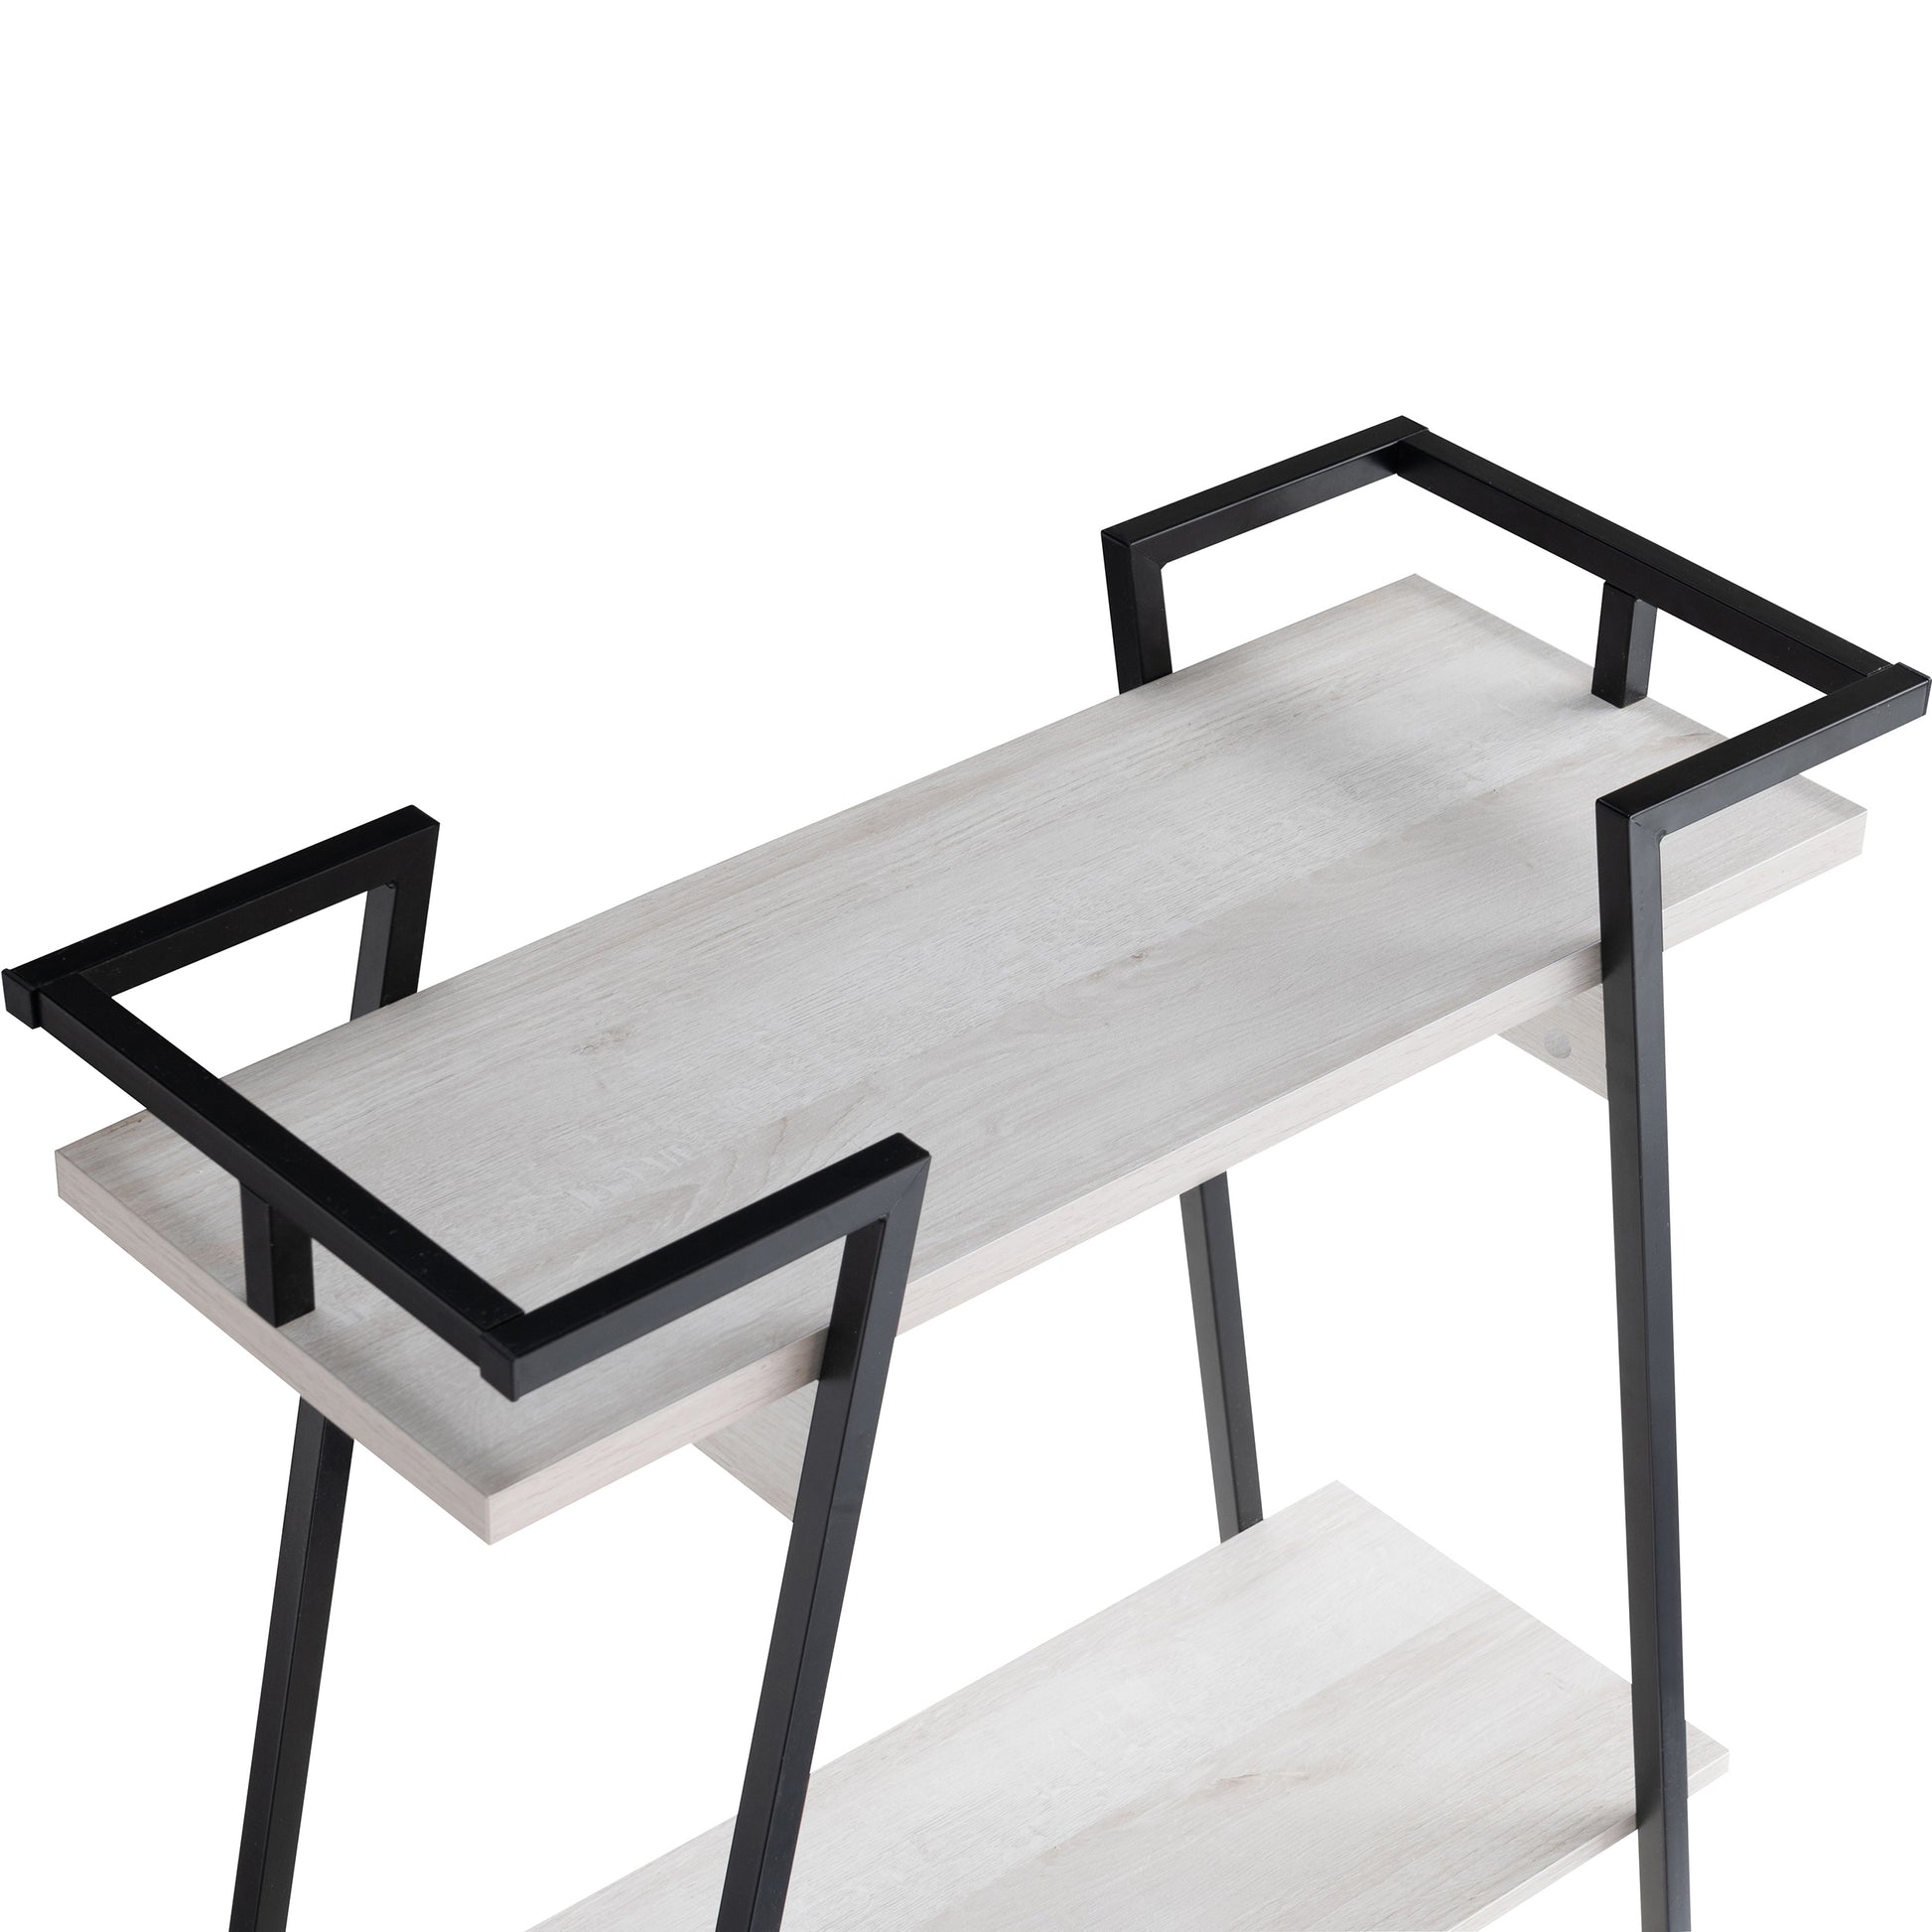 Right angled close-up shelf view of an urban industrial white oak and black two-shelf geometric console table on a white background